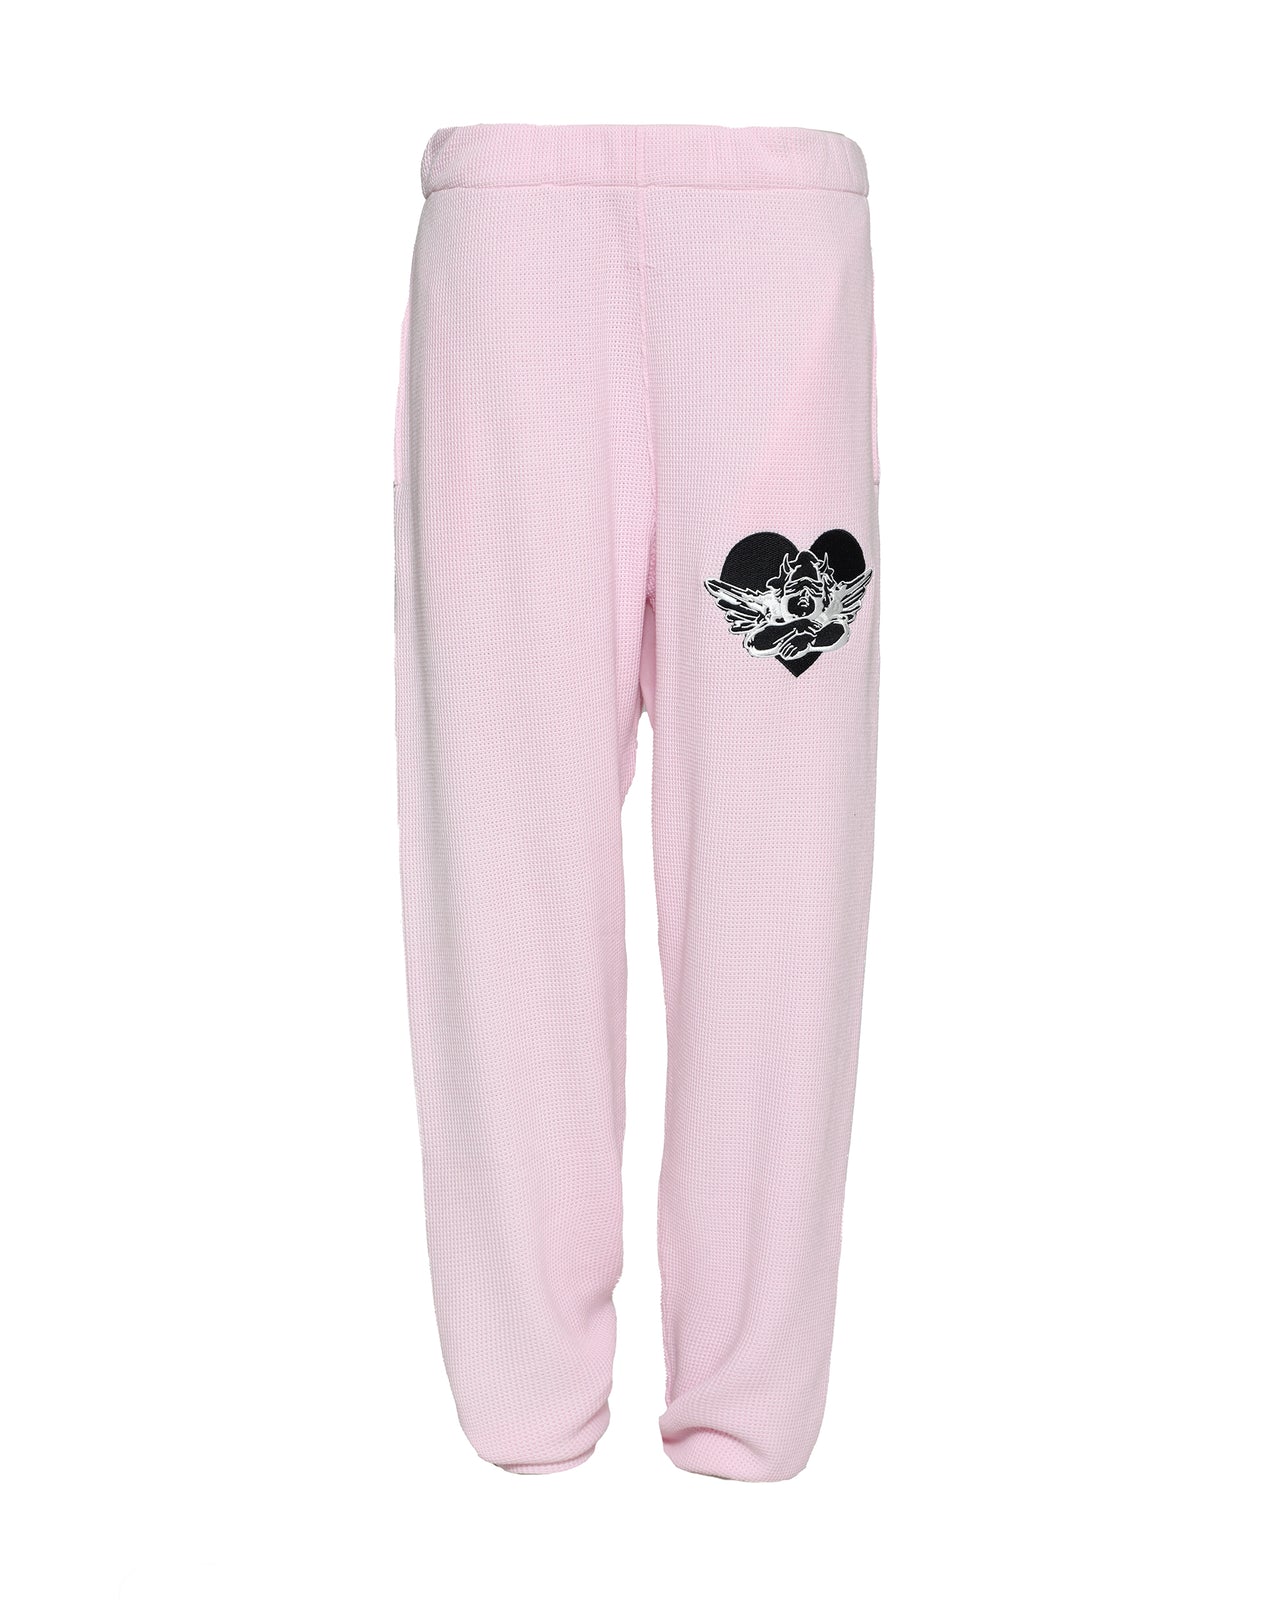 YOURS TRULY THERMAL SWEATPANT